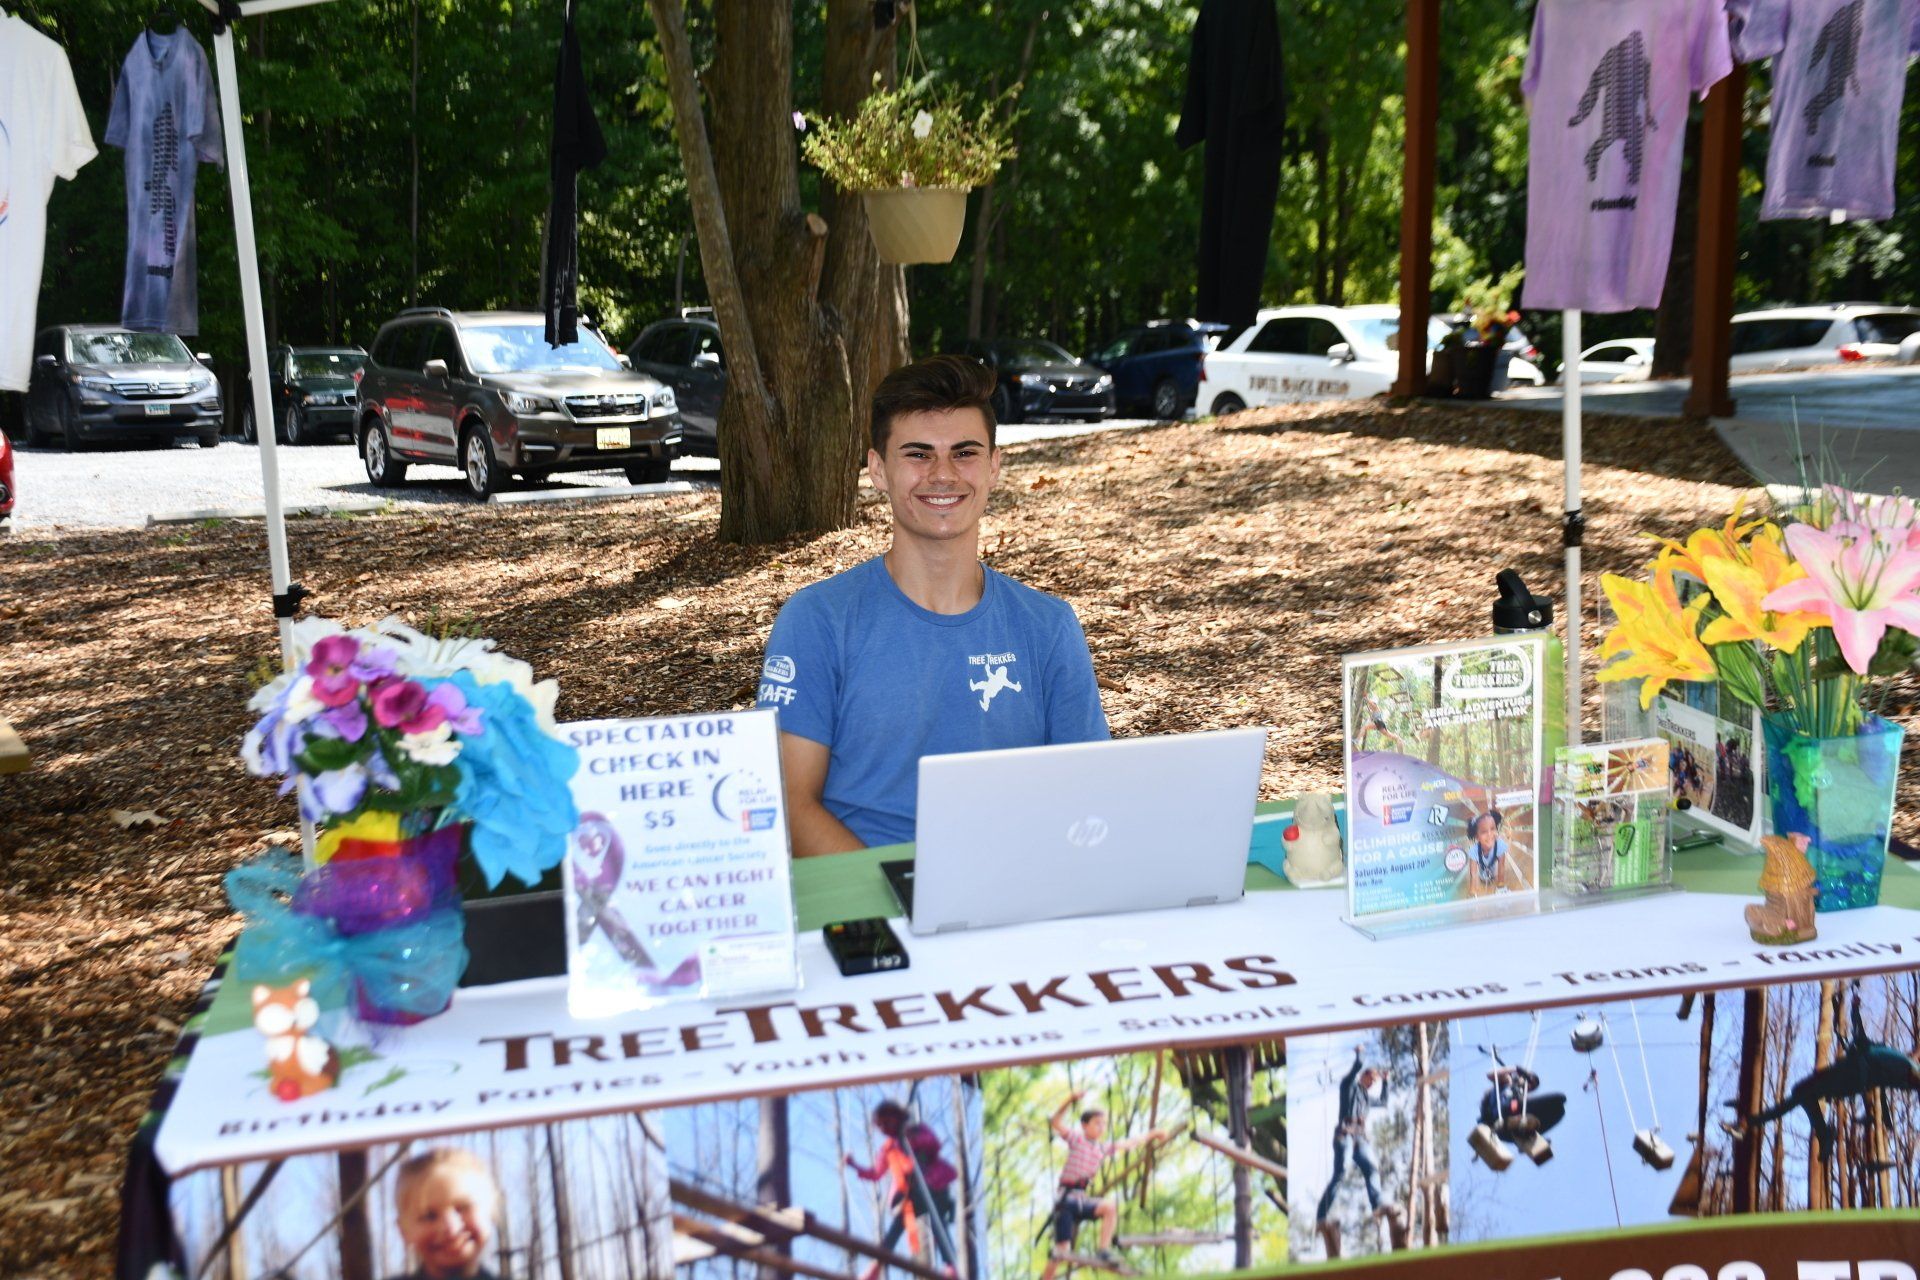 Tree Trekkers staff at Marketing table during Climbing for a Cause Event.